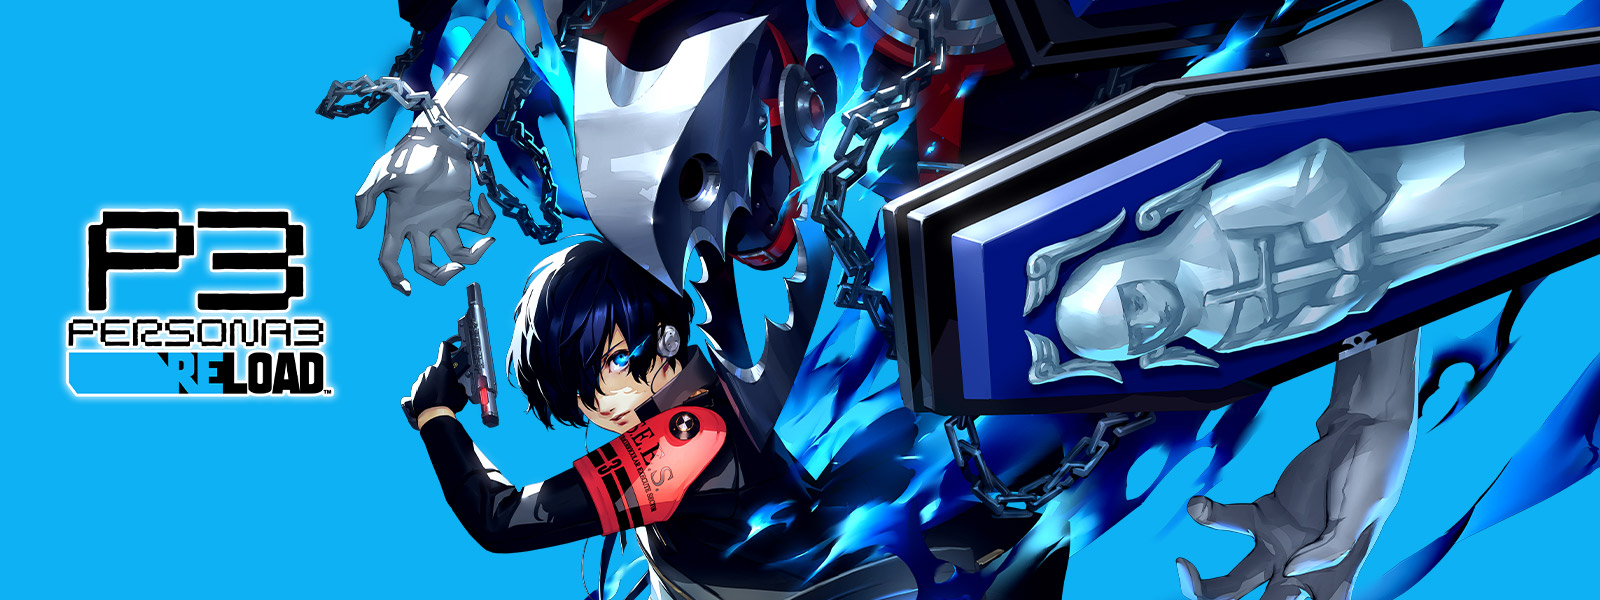 Makoto Yuki holds up a gun and glares while his Persona looms behind him in blue flames.